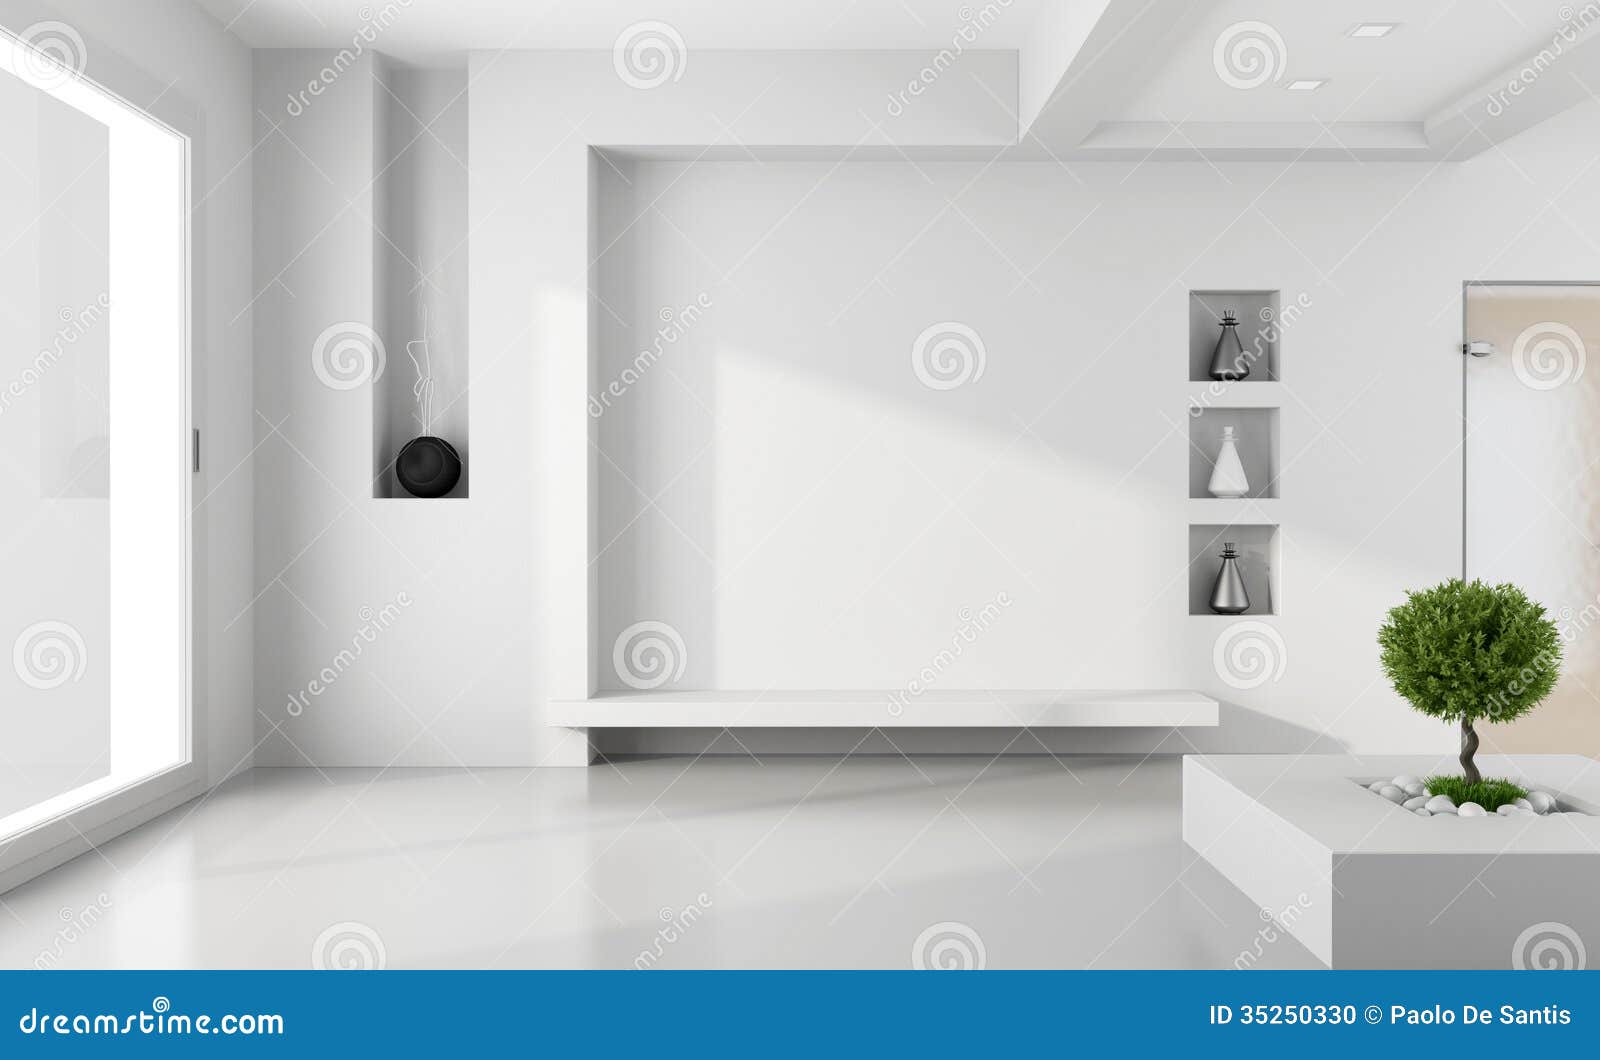 Minimalist white room with niche without furniture - rendering.